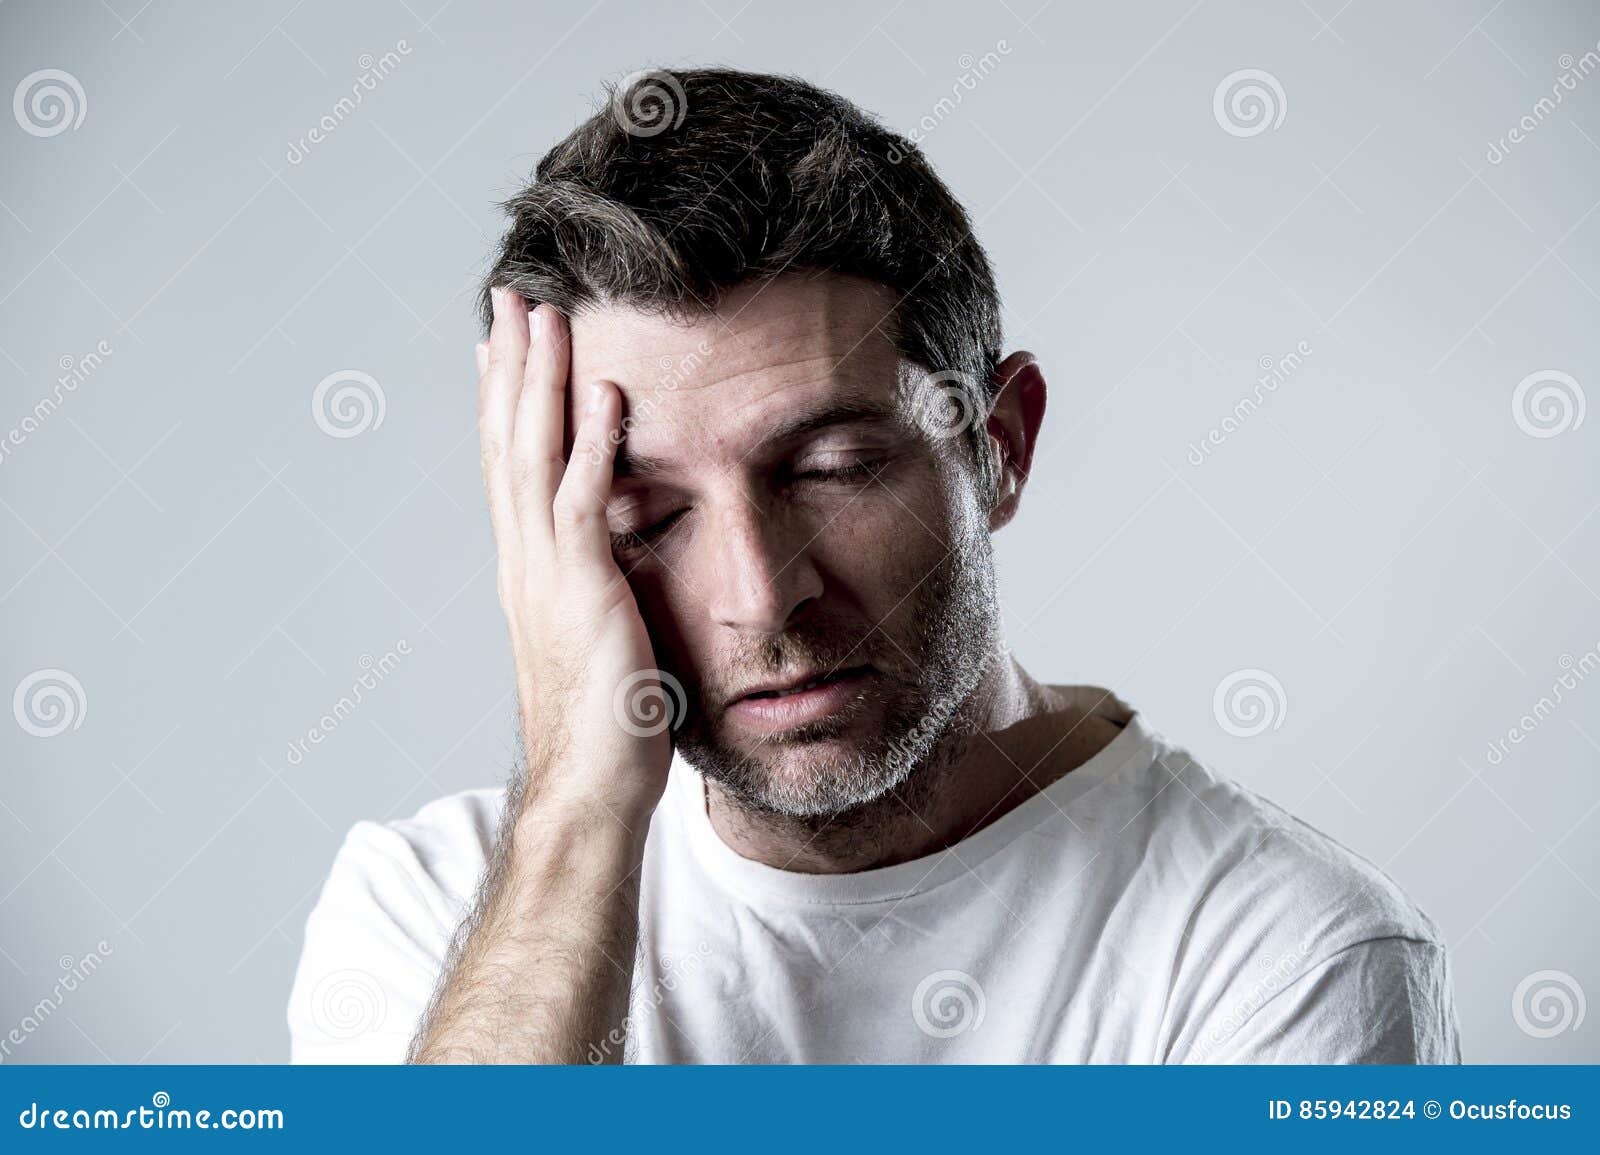 man with blue eyes sad and depressed looking lonely and suffering depression feeling sorrow